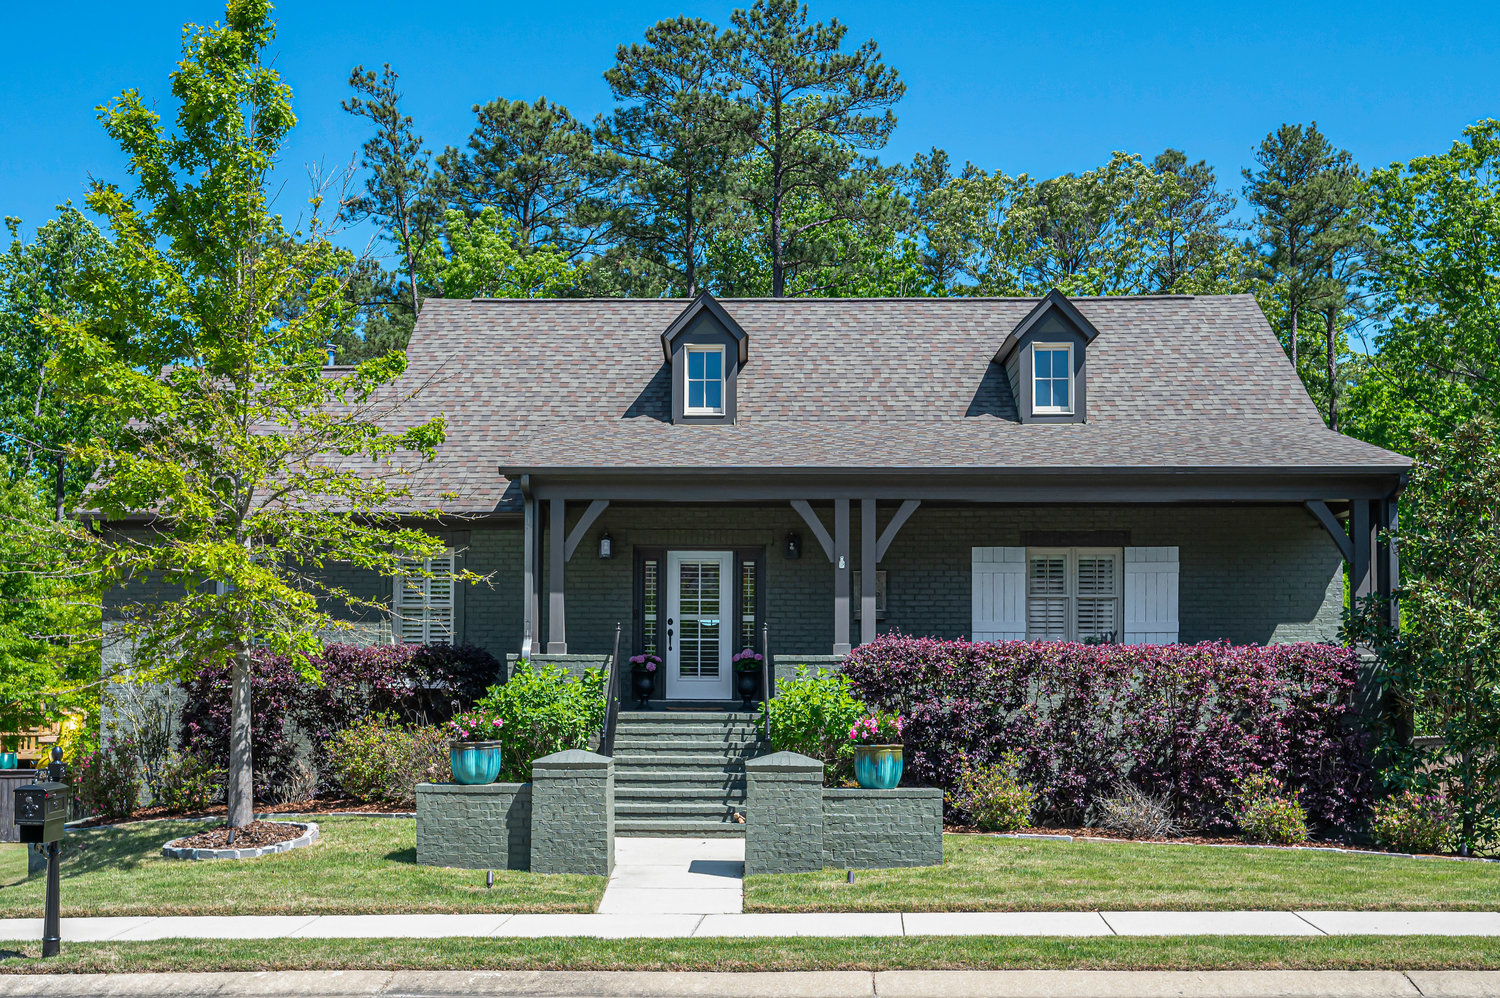 Virtual Tour of Birmingham Metro Real Estate Listing For Sale | 2468 O'Neal Way, Hoover, AL 35242